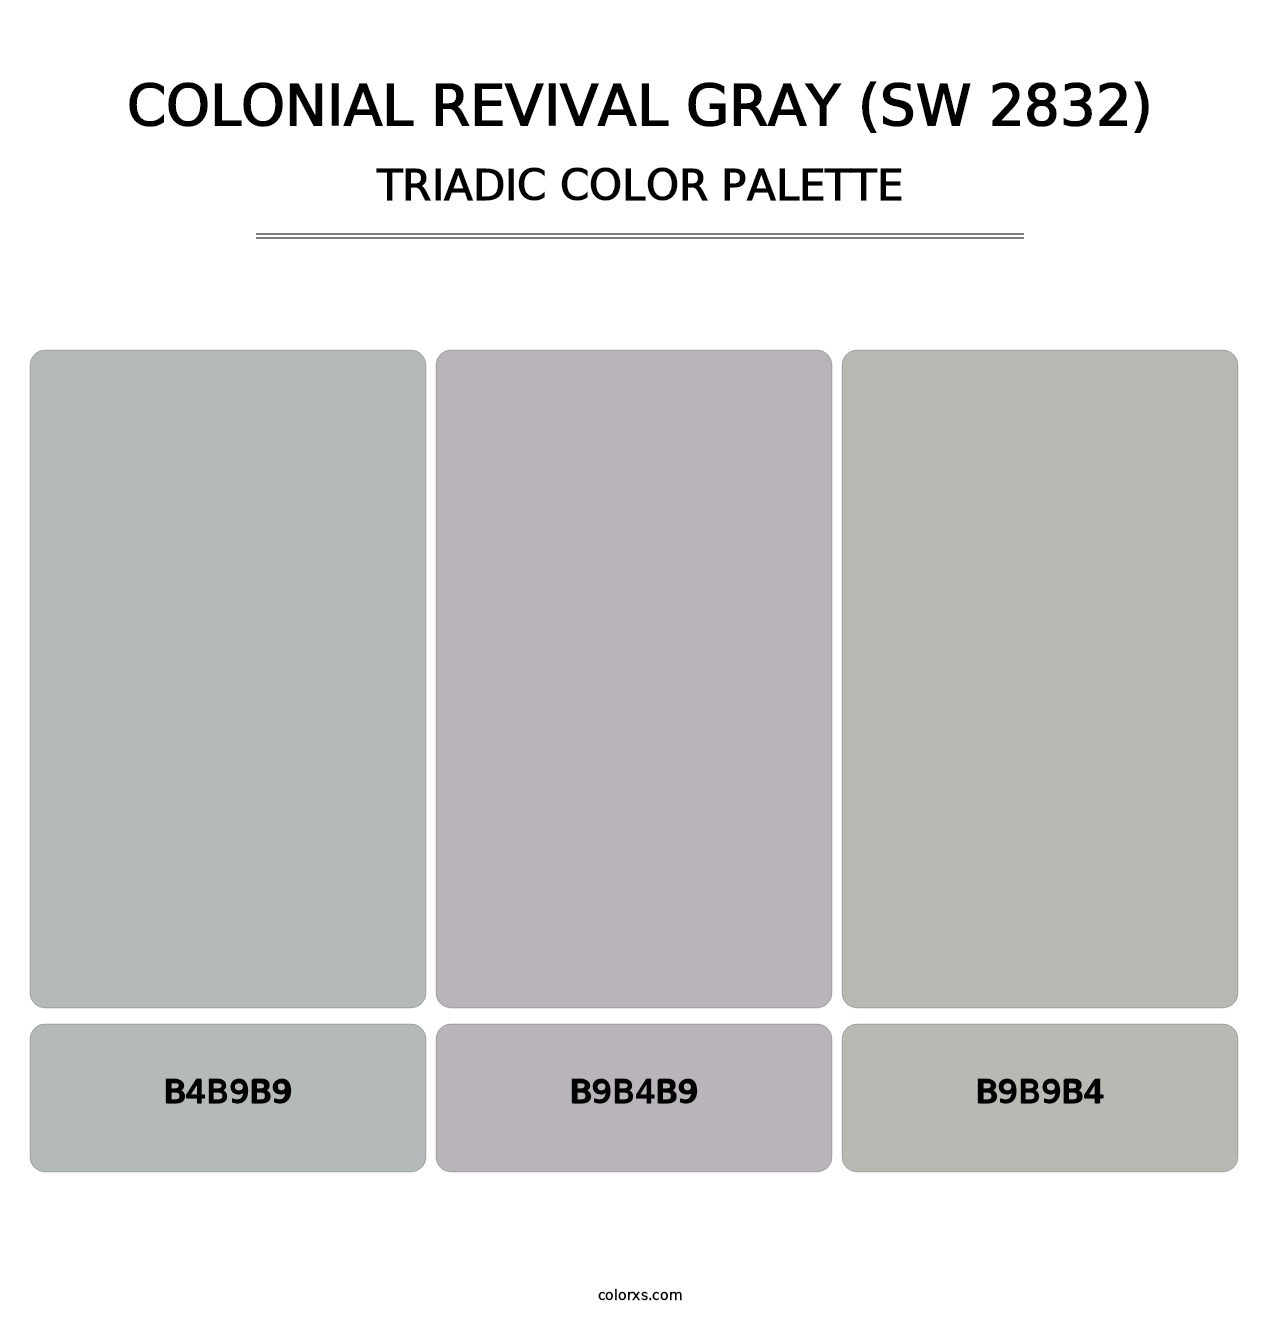 Colonial Revival Gray (SW 2832) - Triadic Color Palette